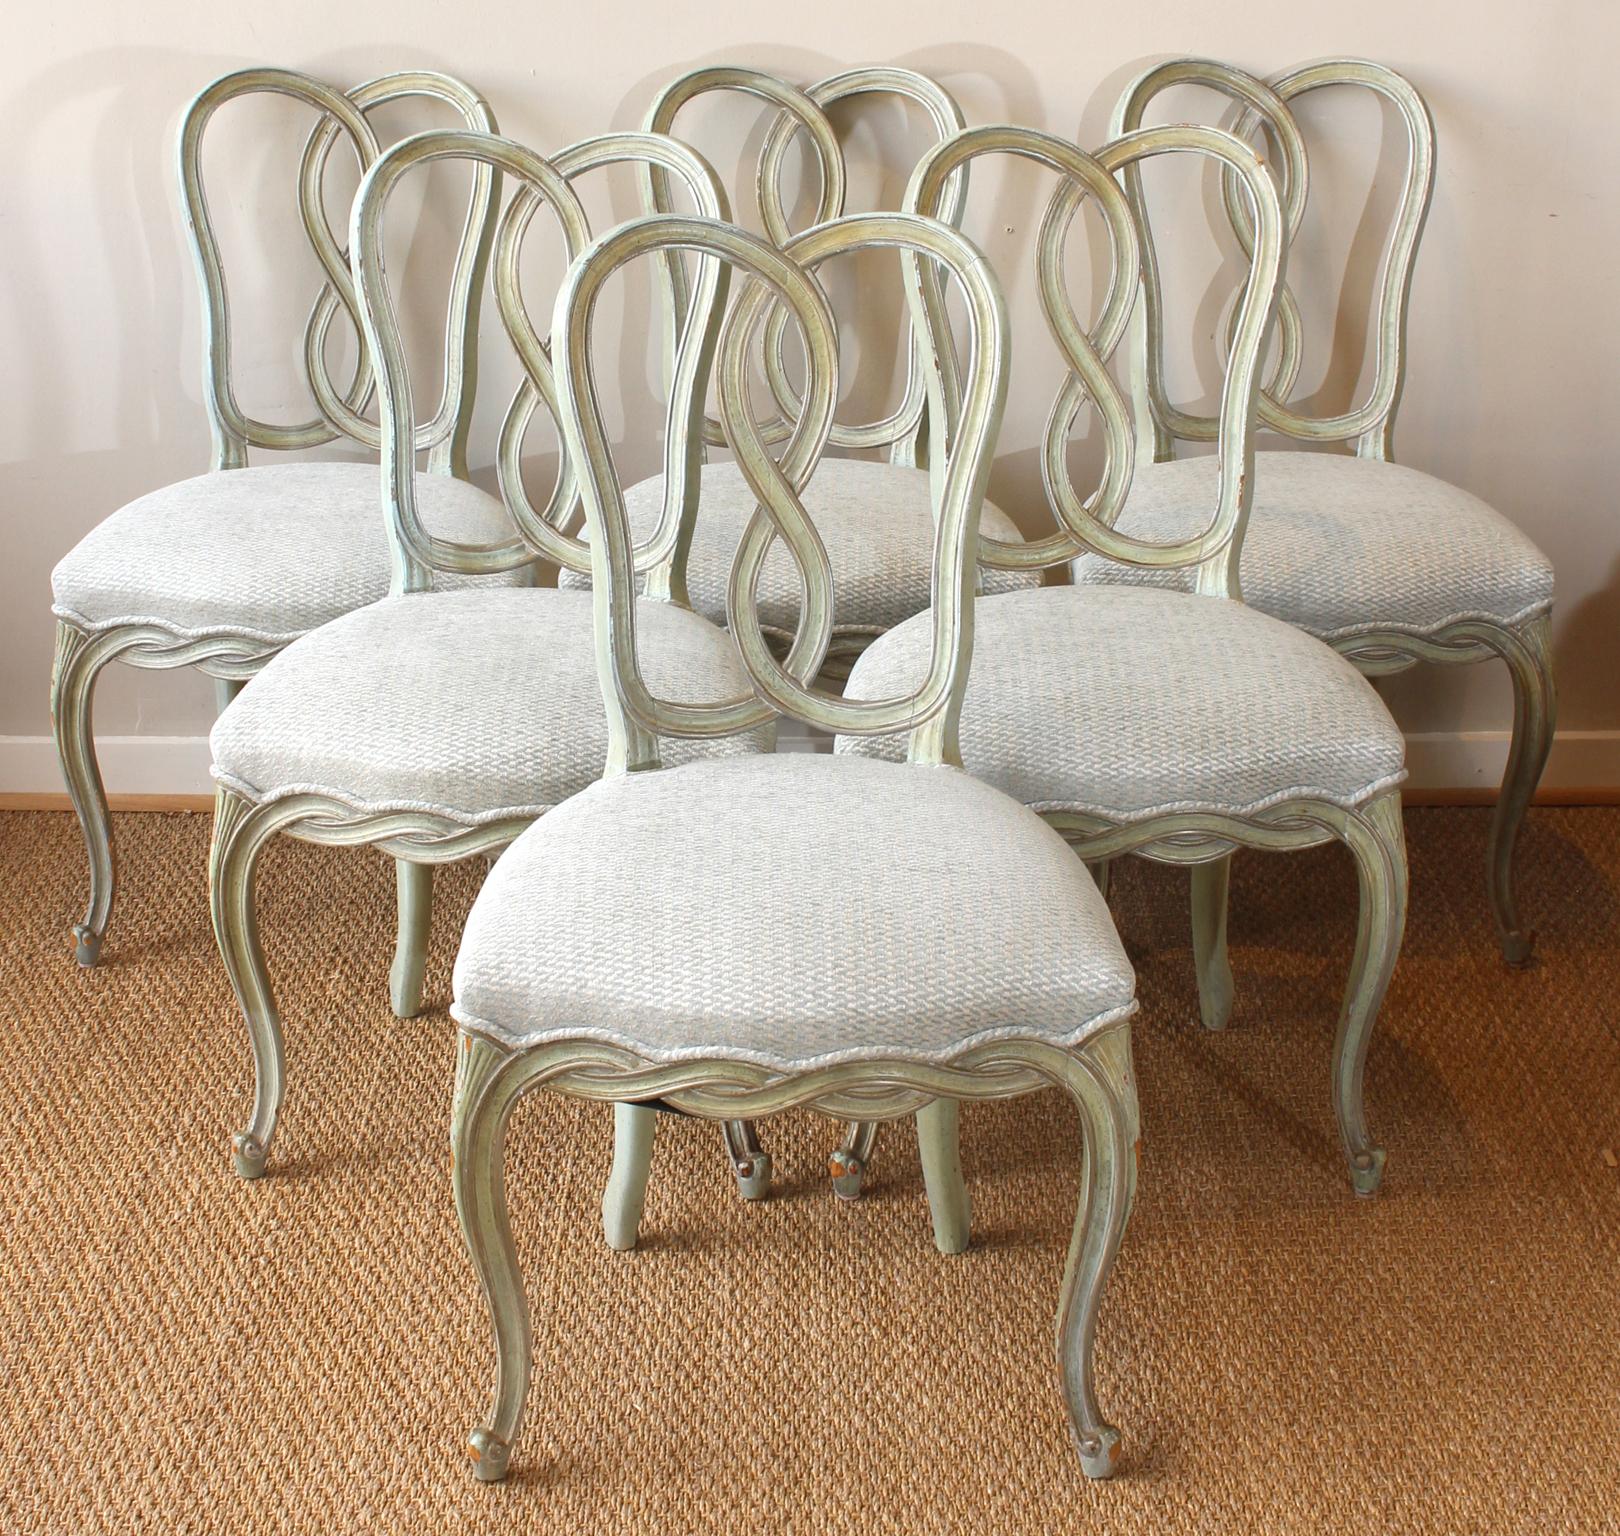 A lovely set of six mid-20th century Italian carved and painted dining chairs comprising six sides recently upholstered in a soft blue/green linen chenille fabric.